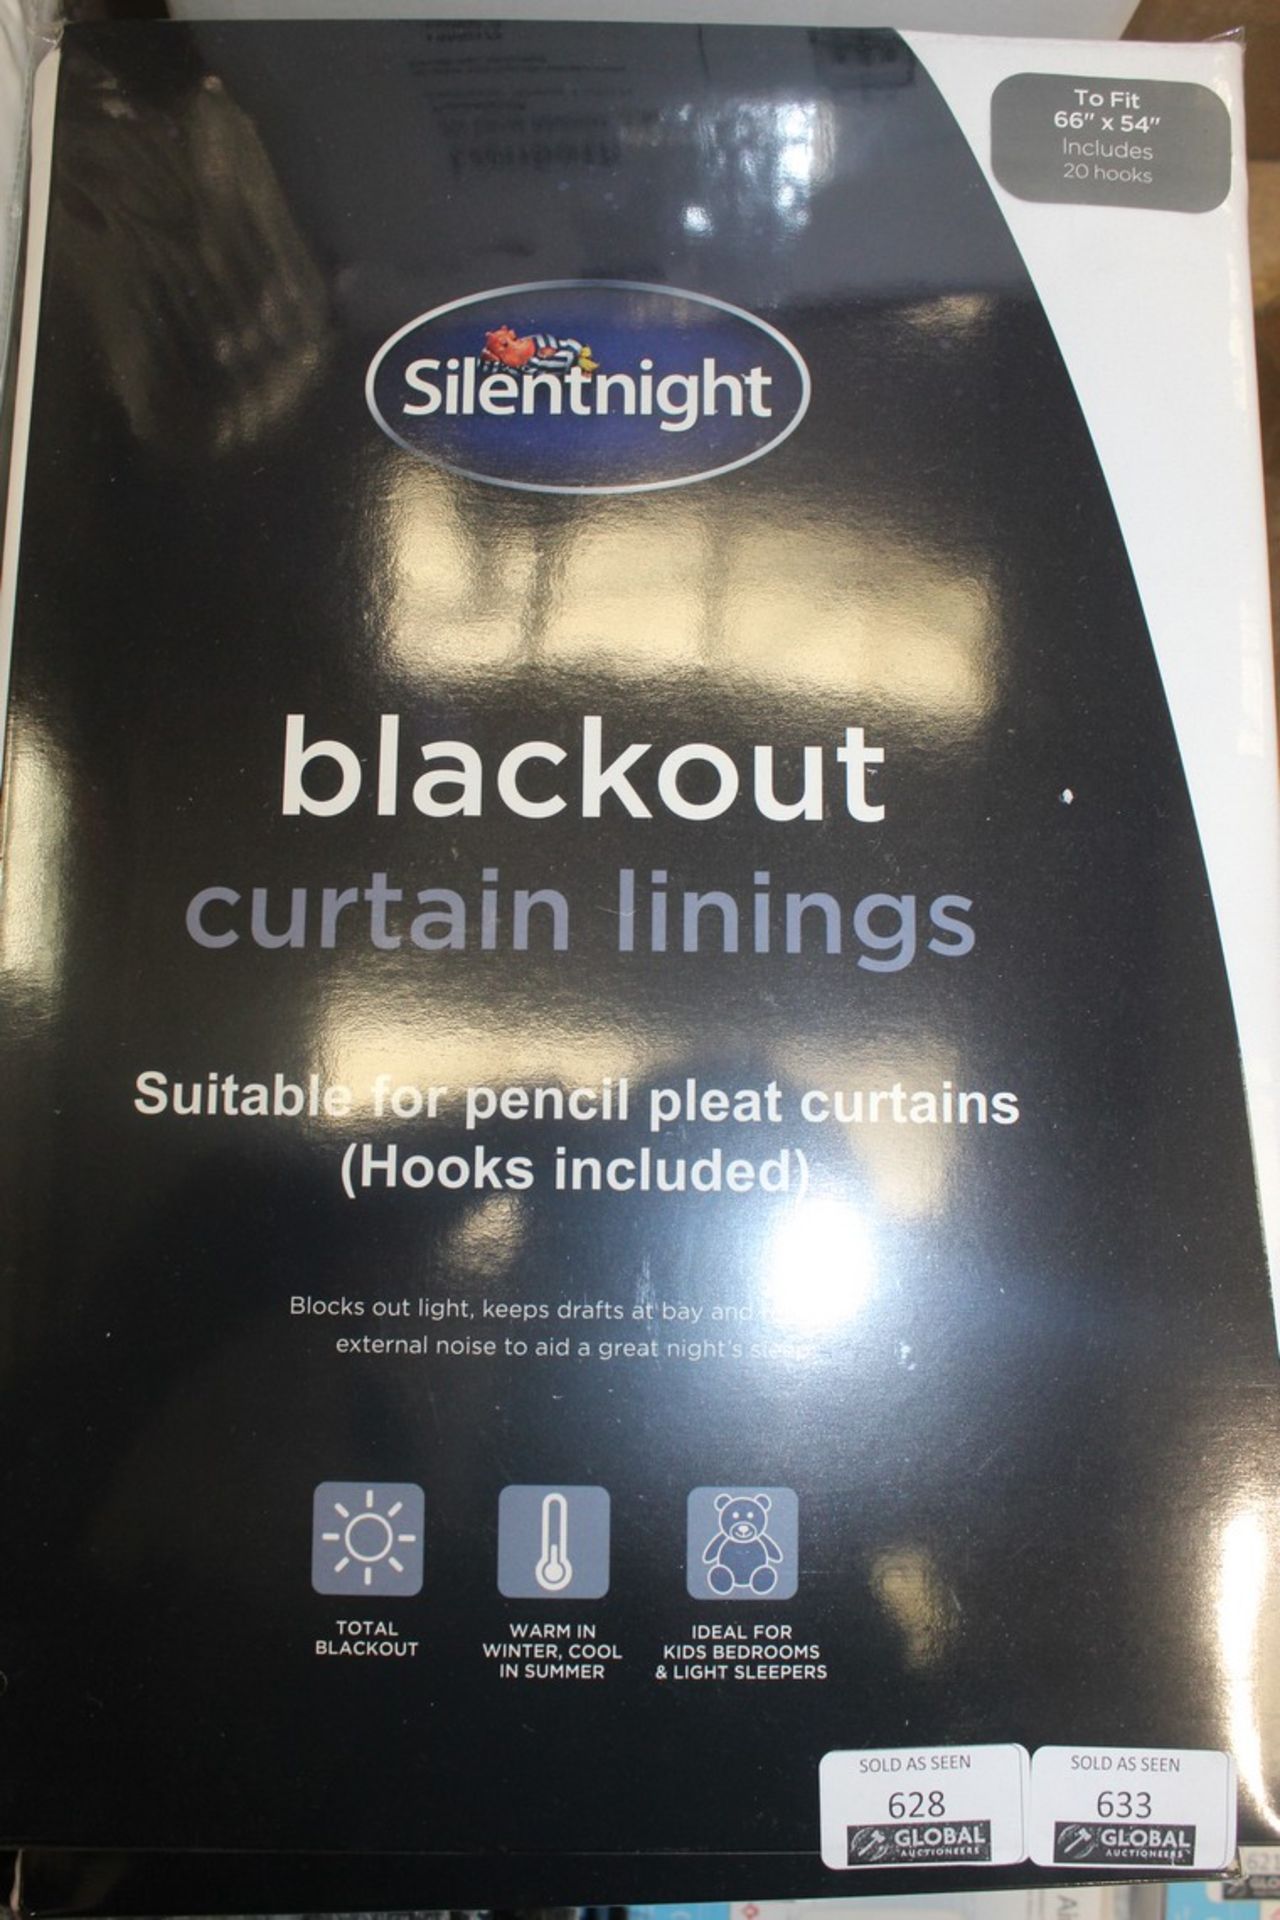 Lot To Contain 2 Brand New Pairs Silent Night 66 x 54" Blackout Curtain Linings RRP £65 (Pictures